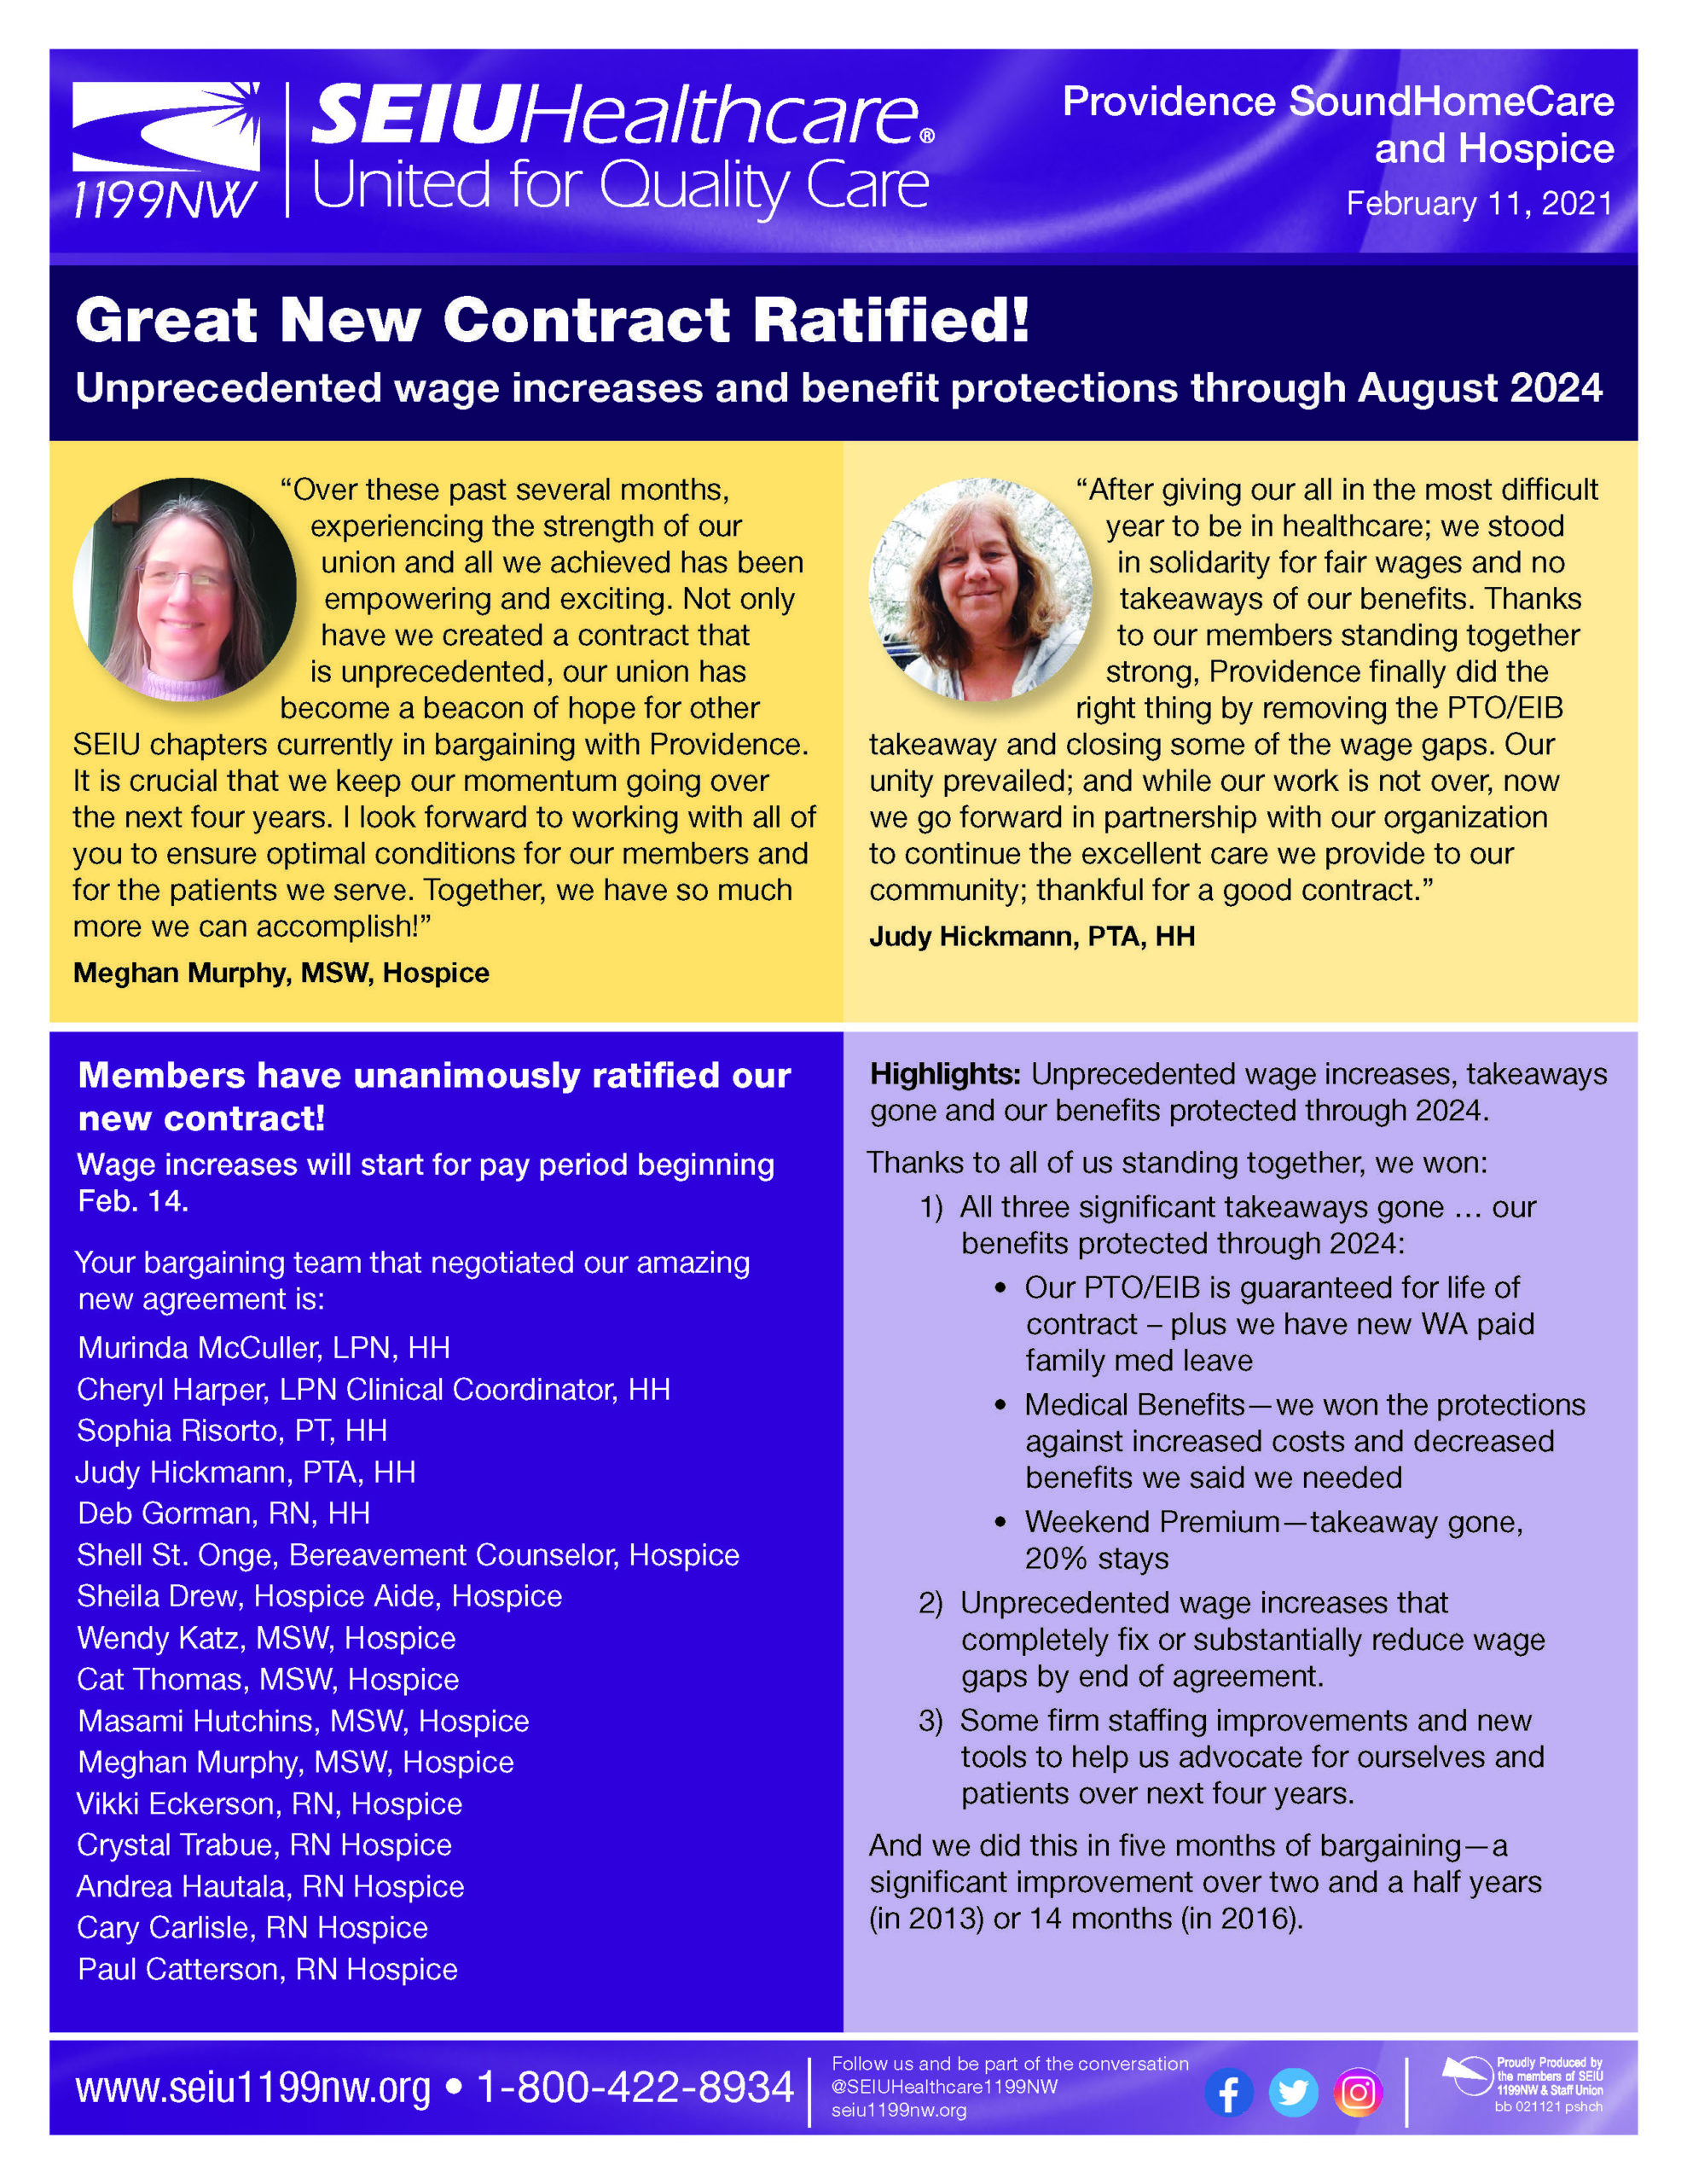 Great New Contract Ratified!